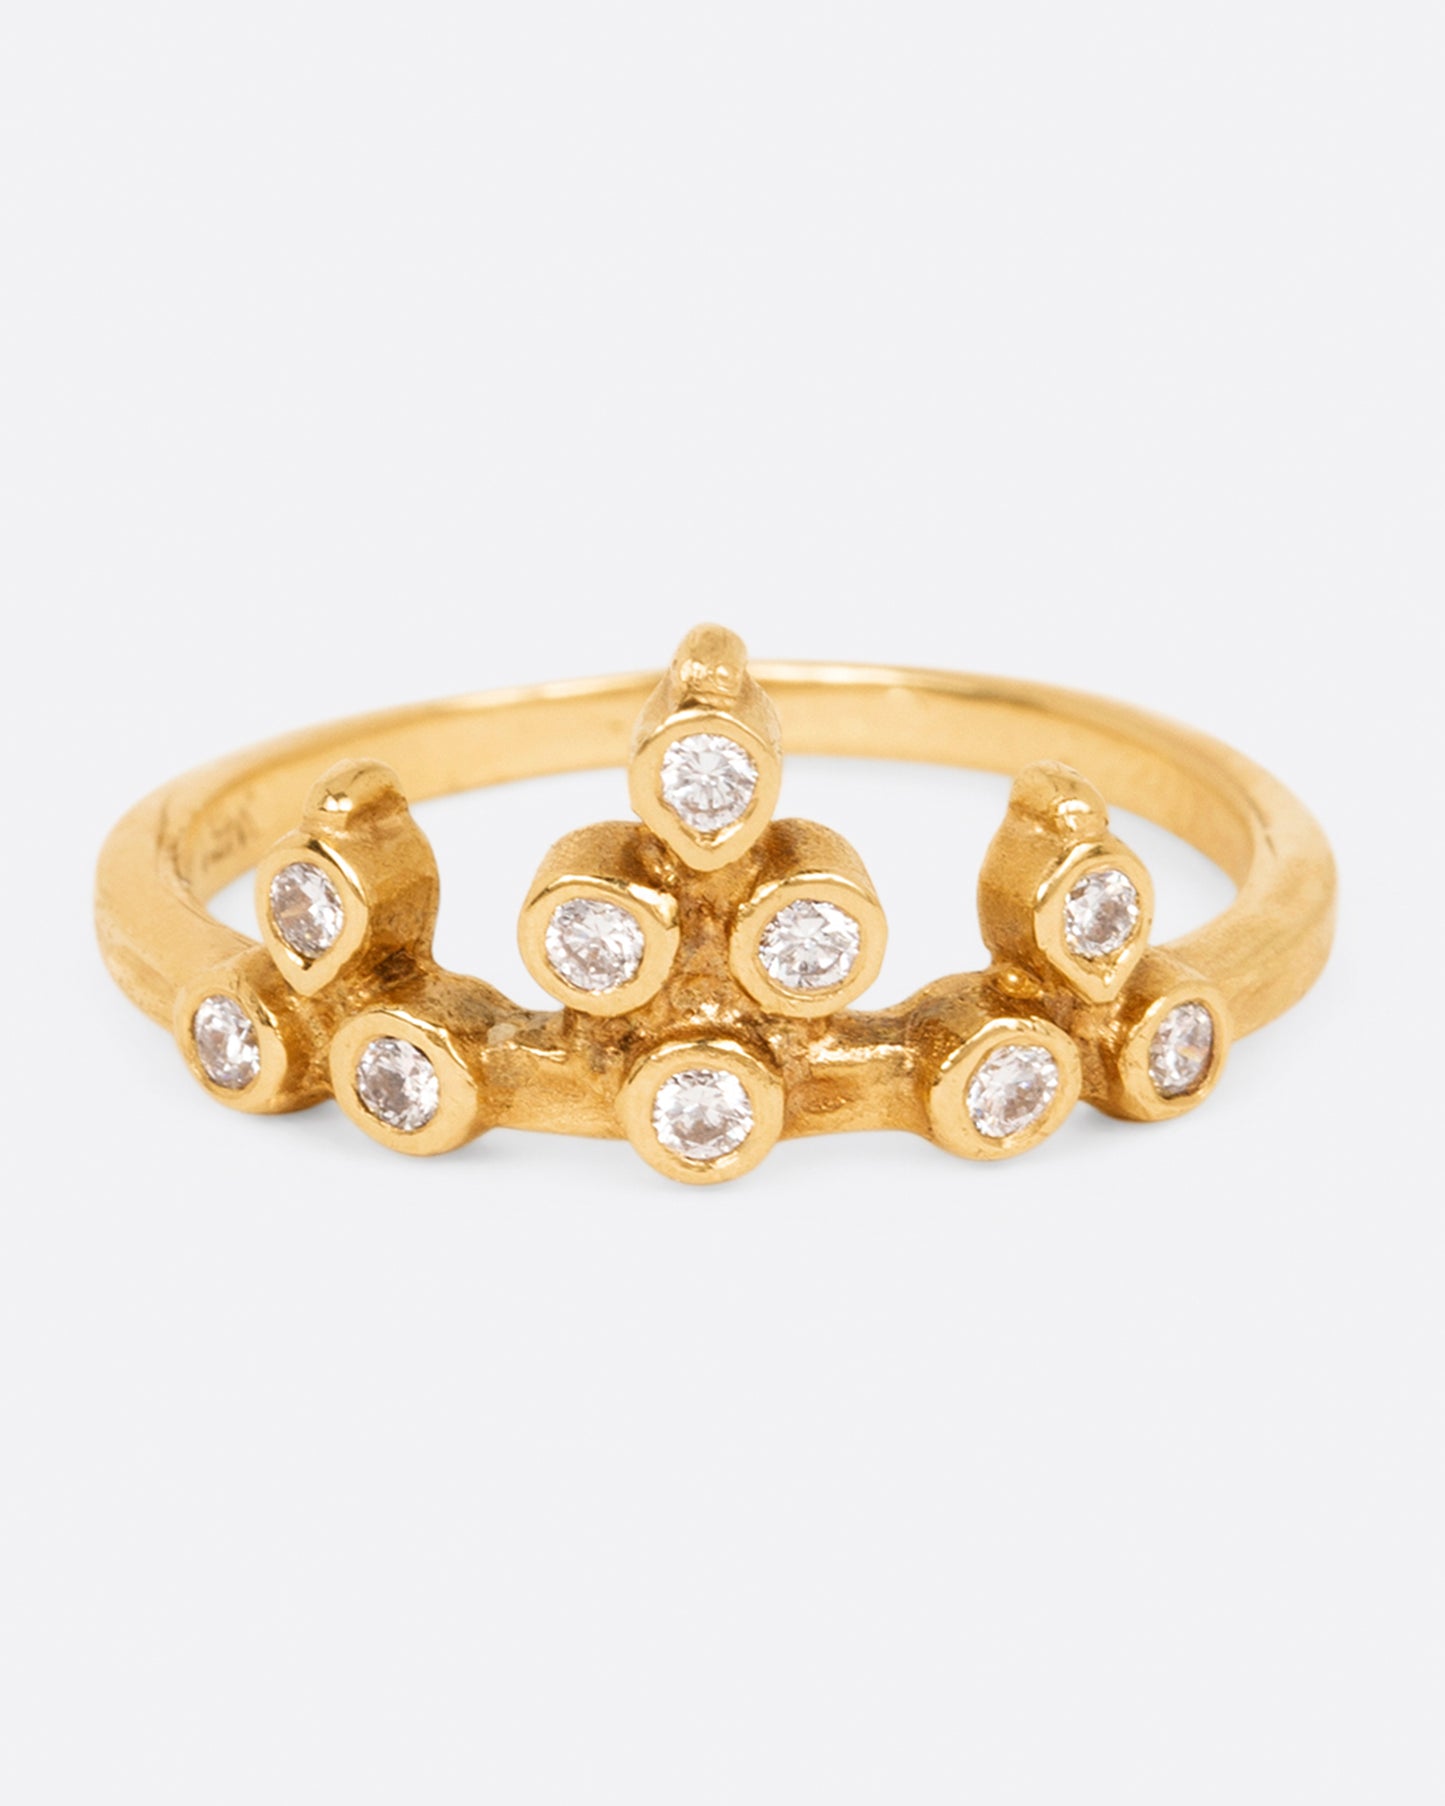 A yellow gold crown ring with round white diamonds, shown from the front.